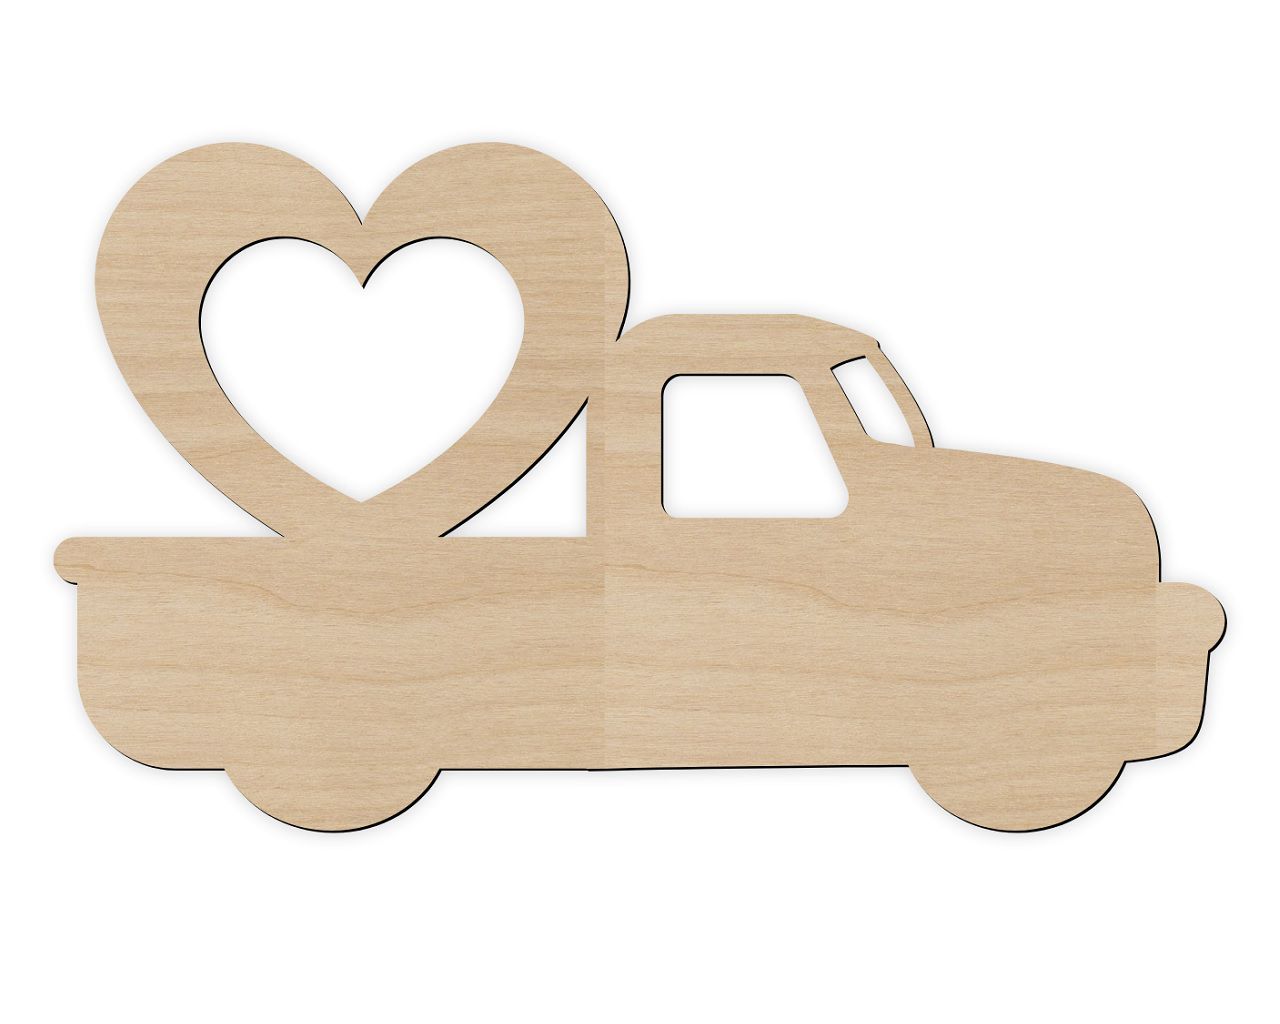 Heart Delivery Truck Wood Cutout for Crafts Laser Cut File